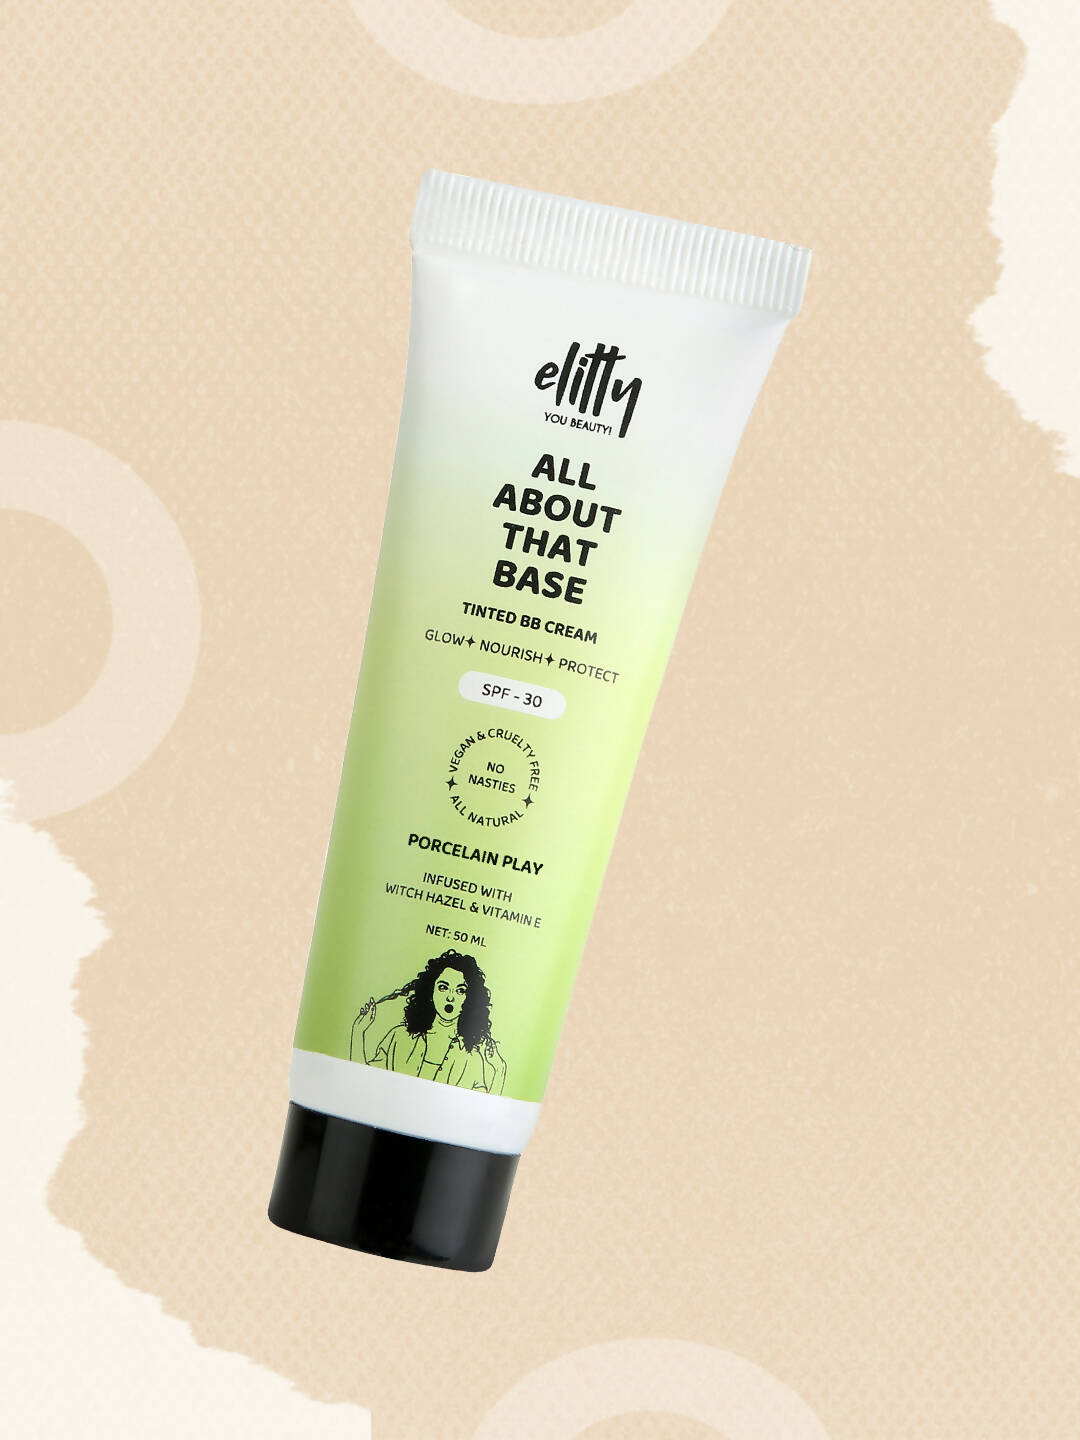 Elitty All About That Base Tinted BB Cream with SPF 30 - Porcelain Play - Distacart